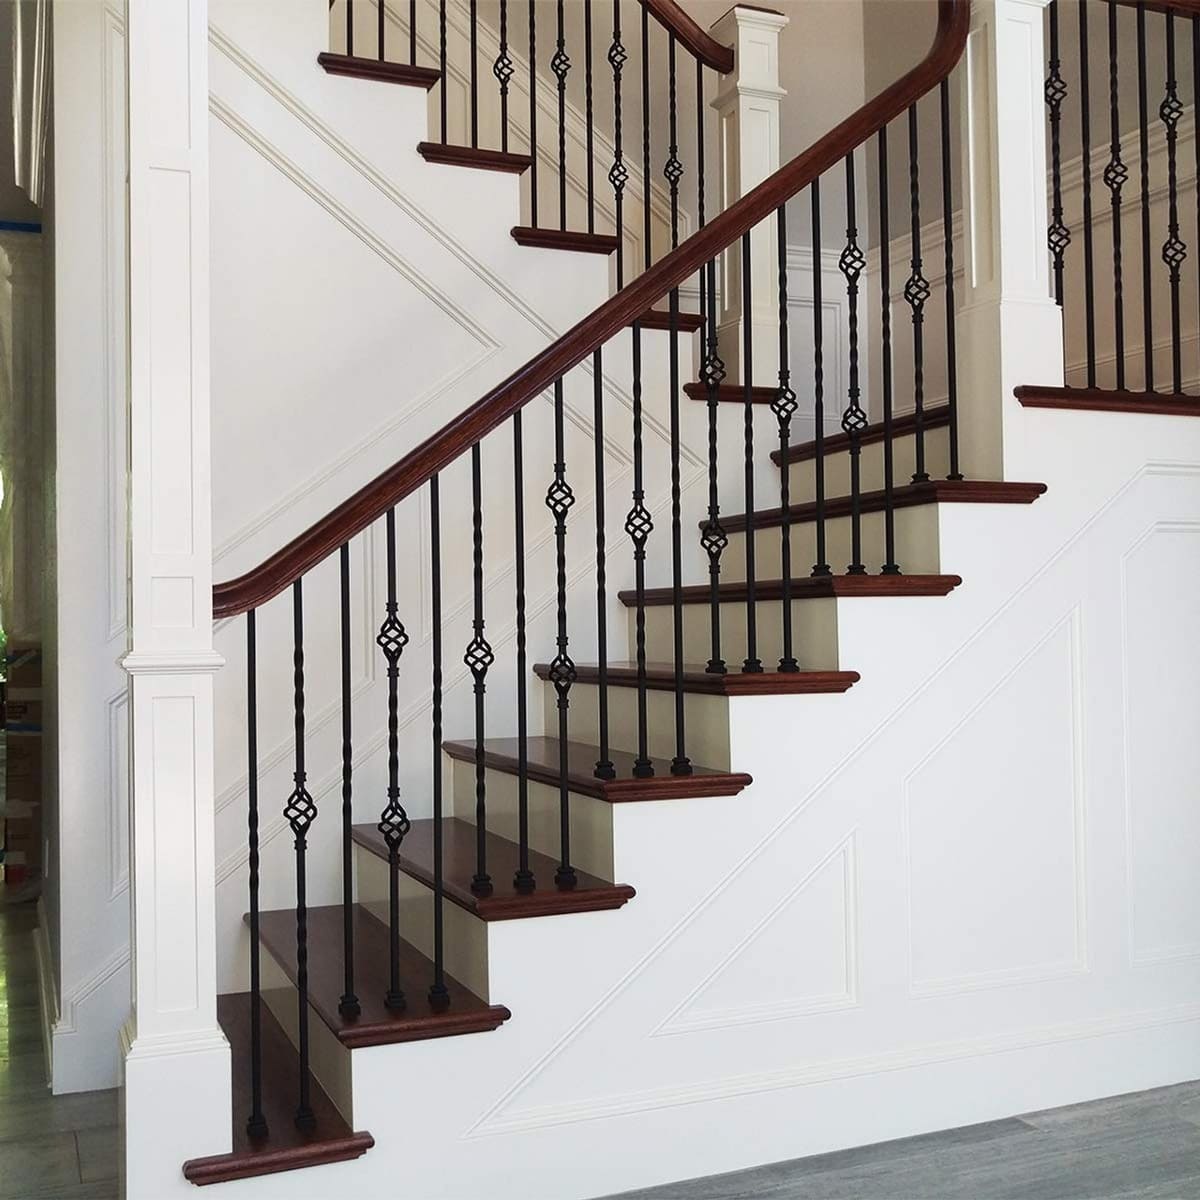 How To Install Metal Spindles On Stairs